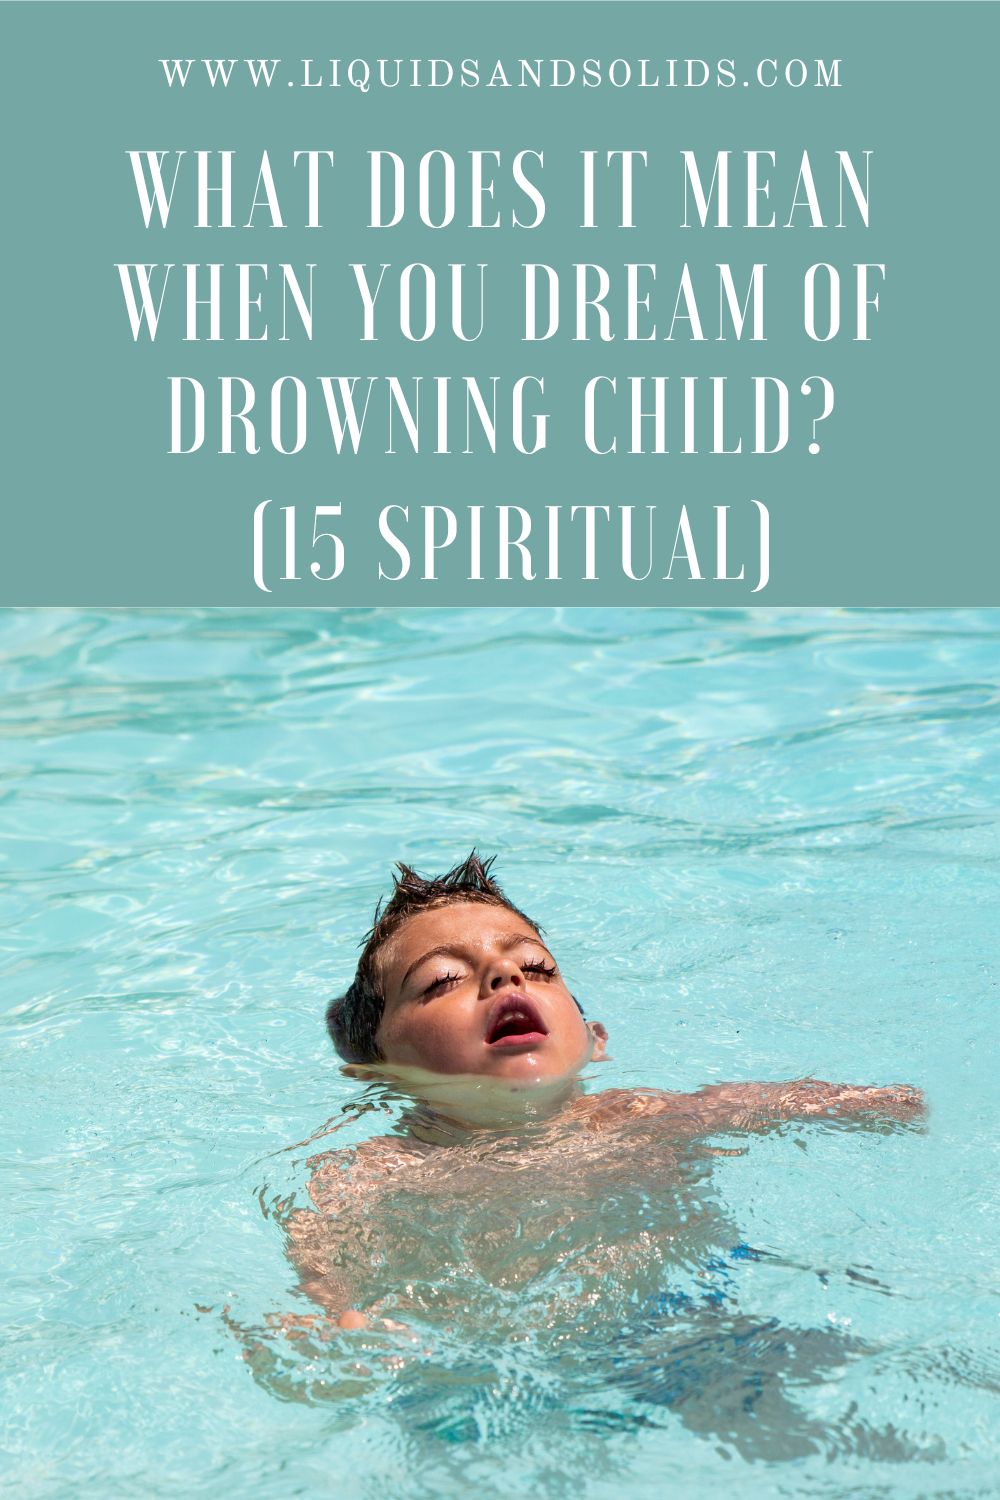 What Does Swimming In A Dream Mean?